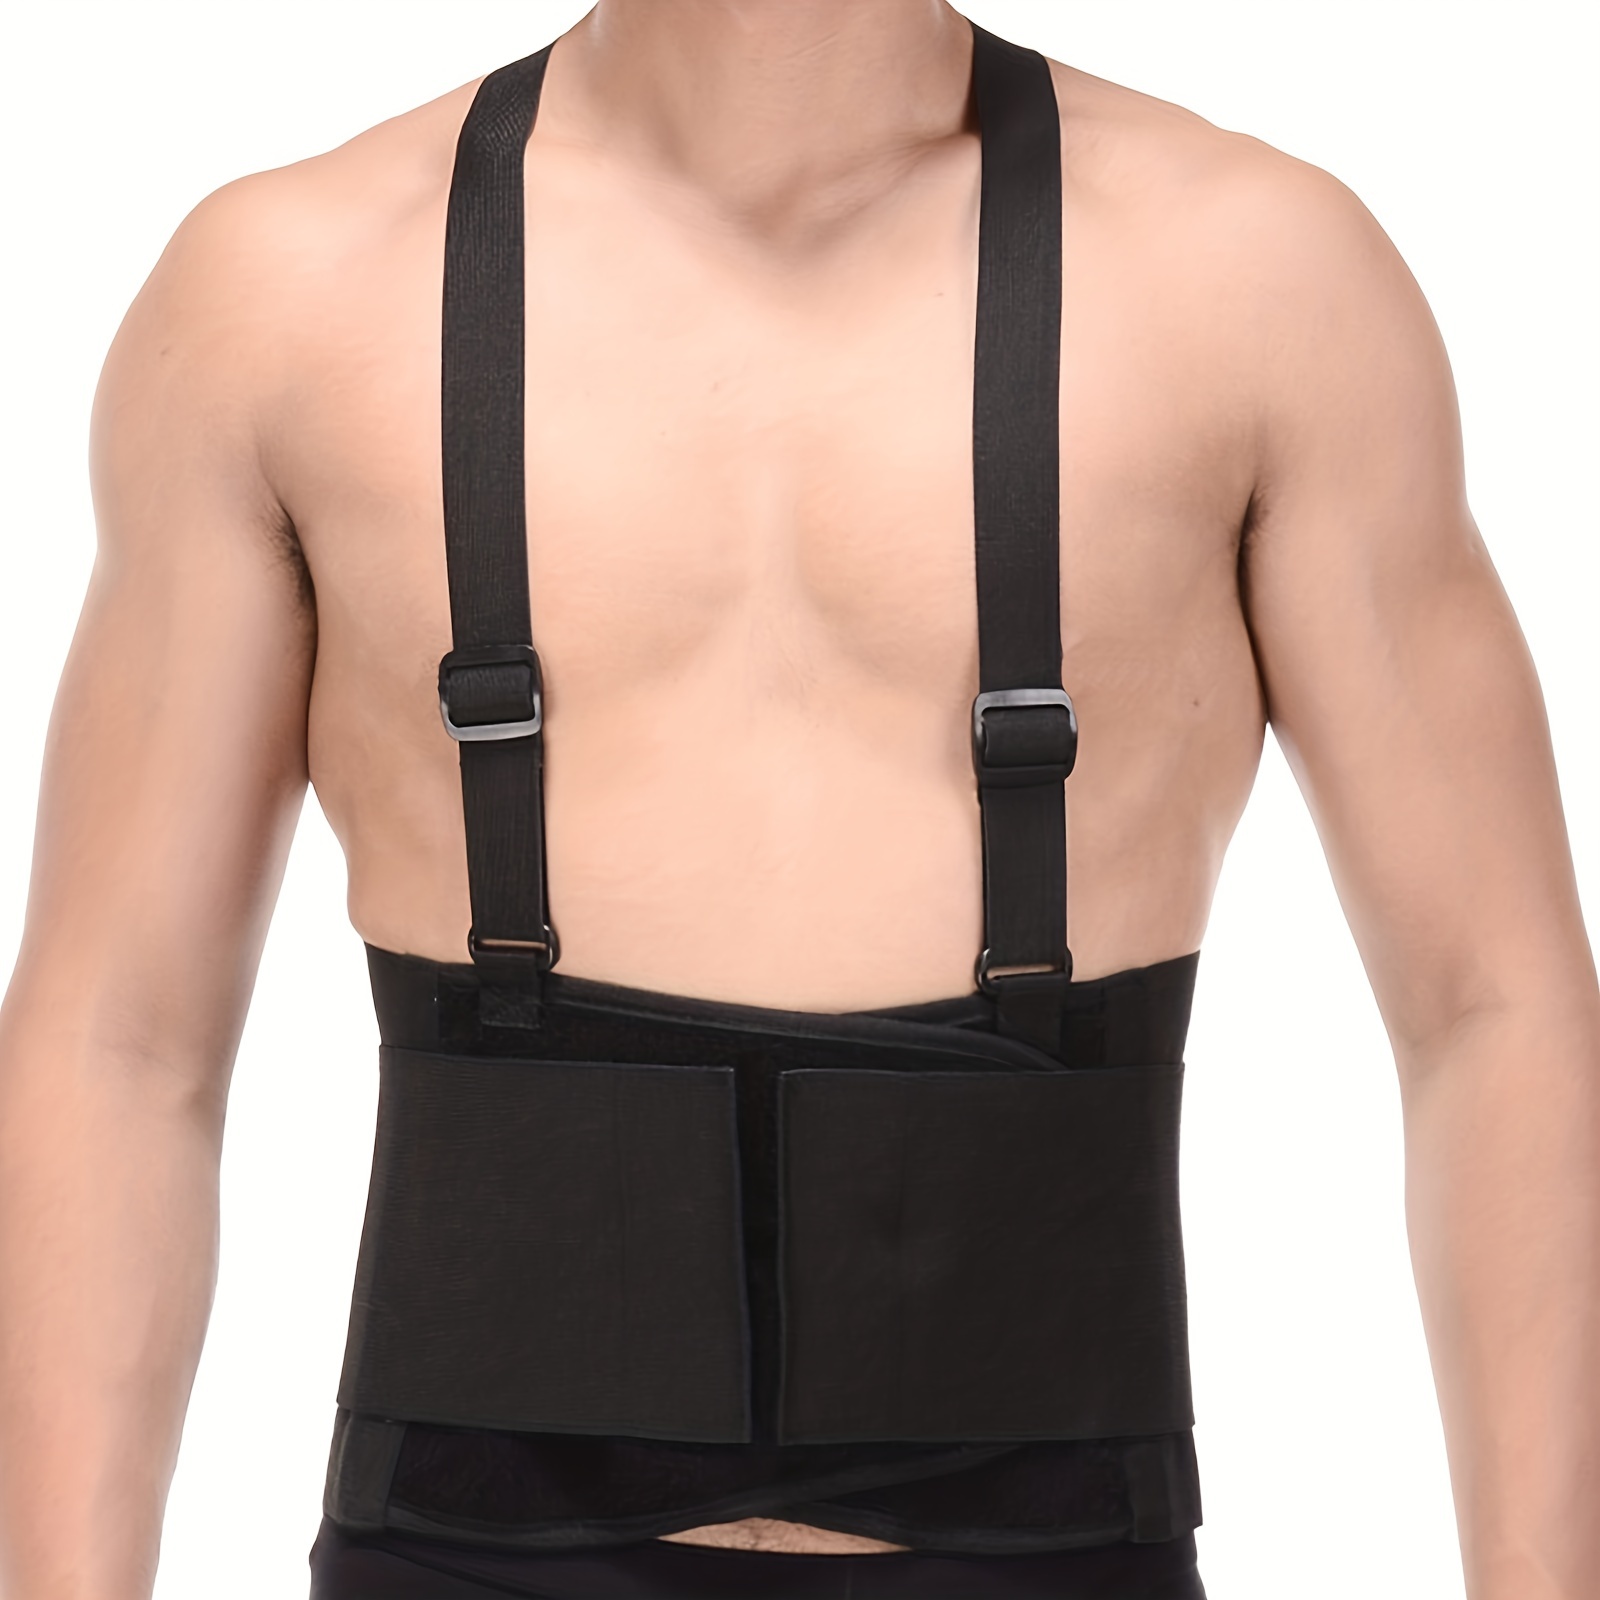 Back Brace Men and Women - Lower Lumbar Support for Heavy Lifting